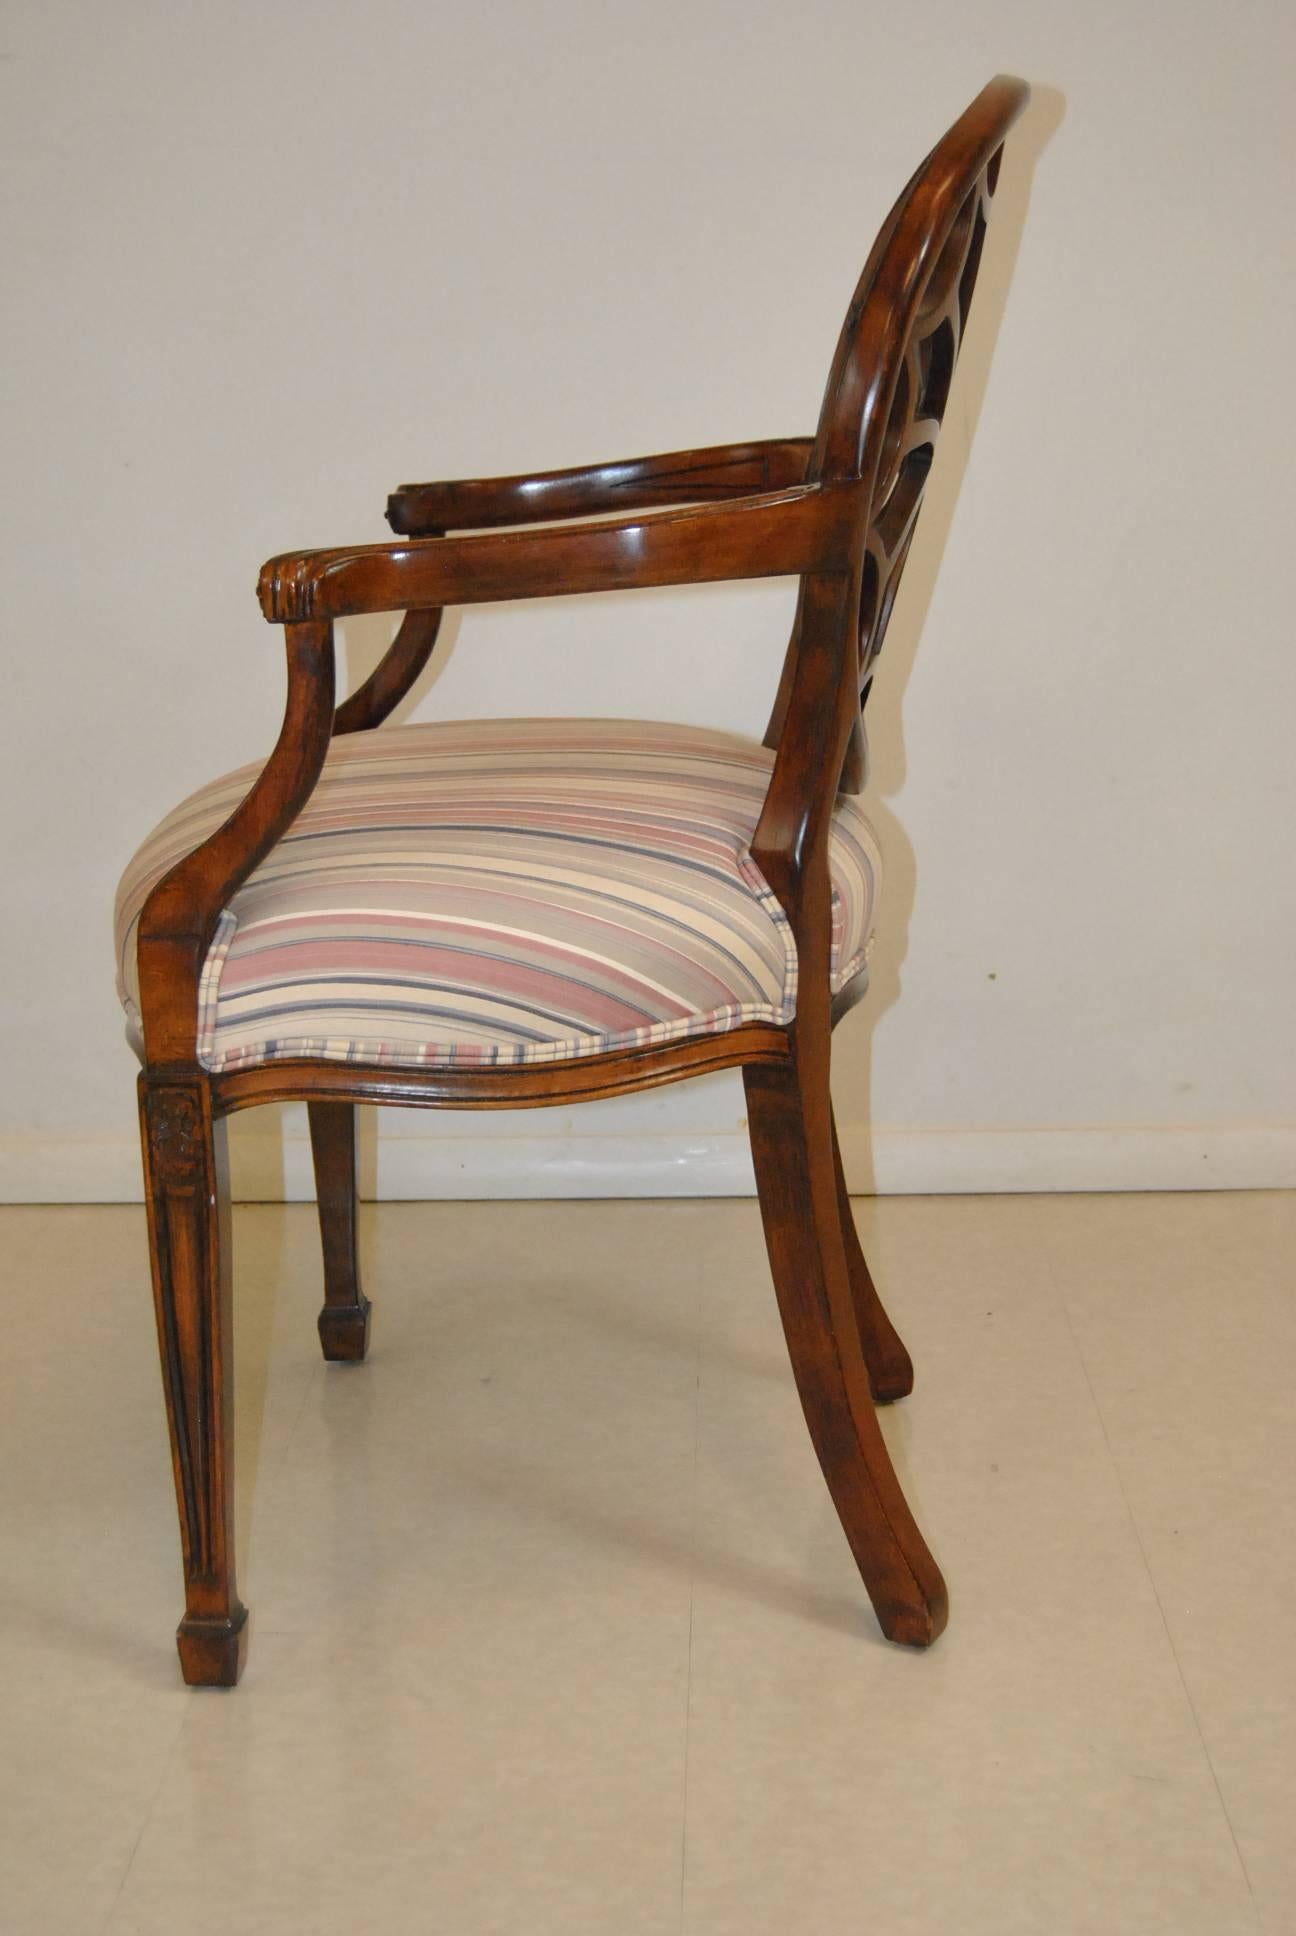 The spider web back accent chair by Sherrill Furniture has a mahogany wood frame and an elegant striped fabric seat. The unique details add interest and elegance. The perfect piece to add instant glamour to any space. The dimensions are 38